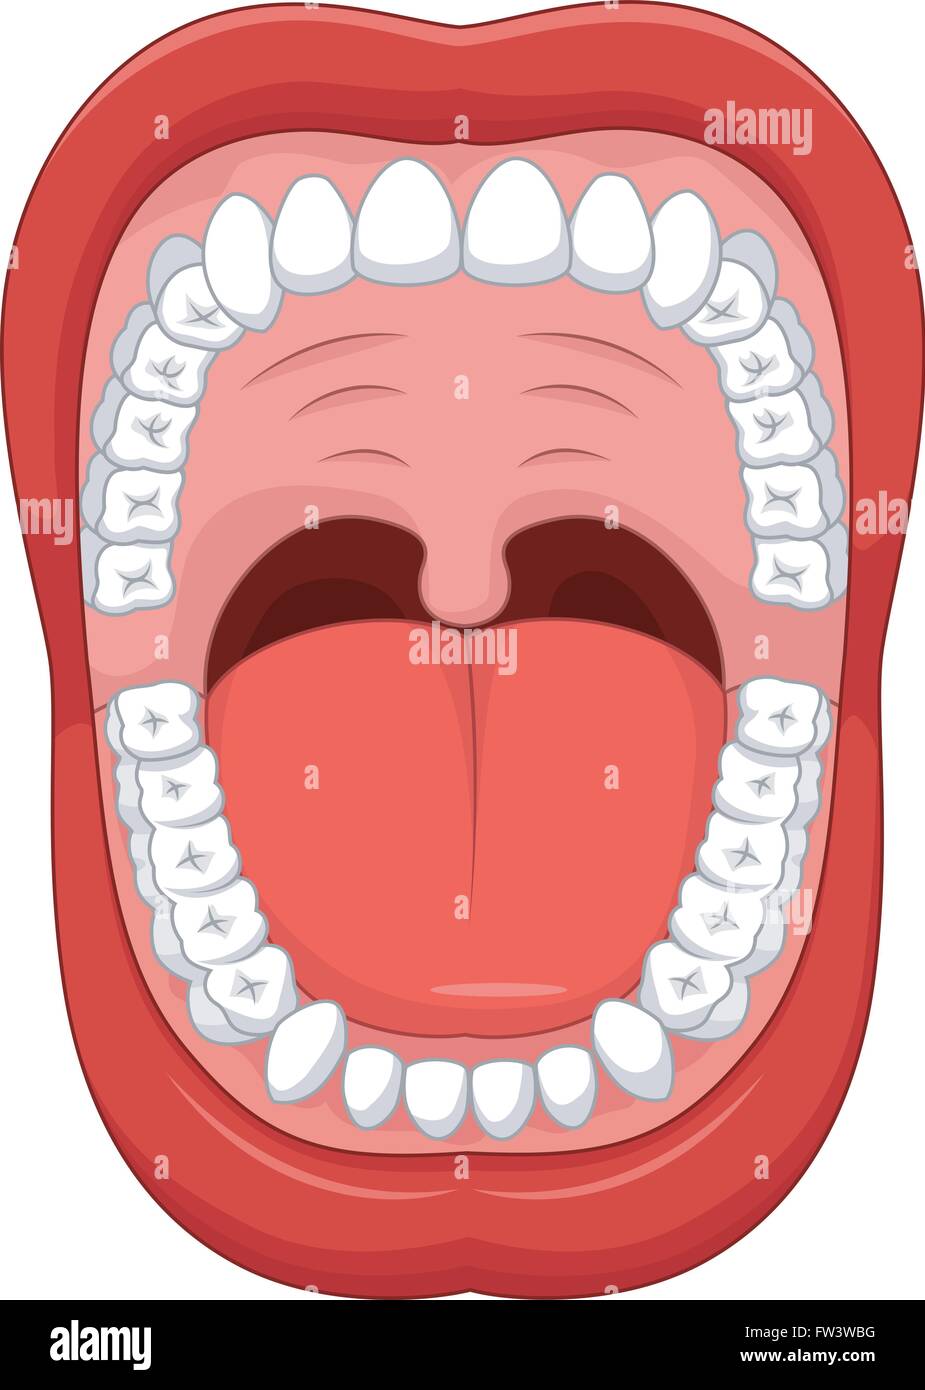 Parts Of Human Mouth 55